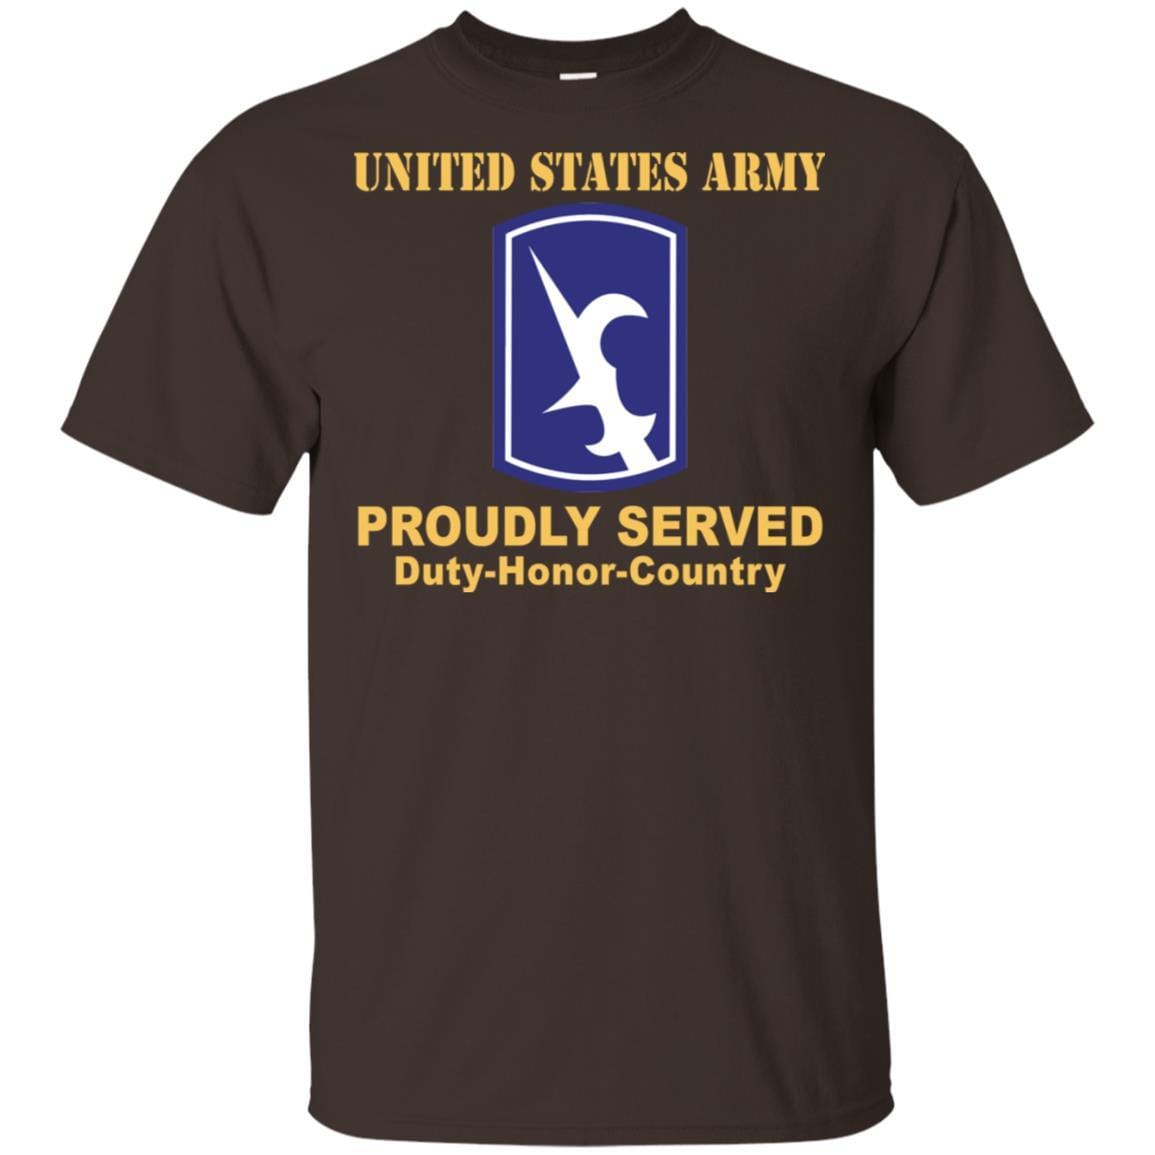 US ARMY 67TH BATTLEFIELD SURVEILLANCE BRIGADE - Proudly Served T-Shirt On Front For Men-TShirt-Army-Veterans Nation